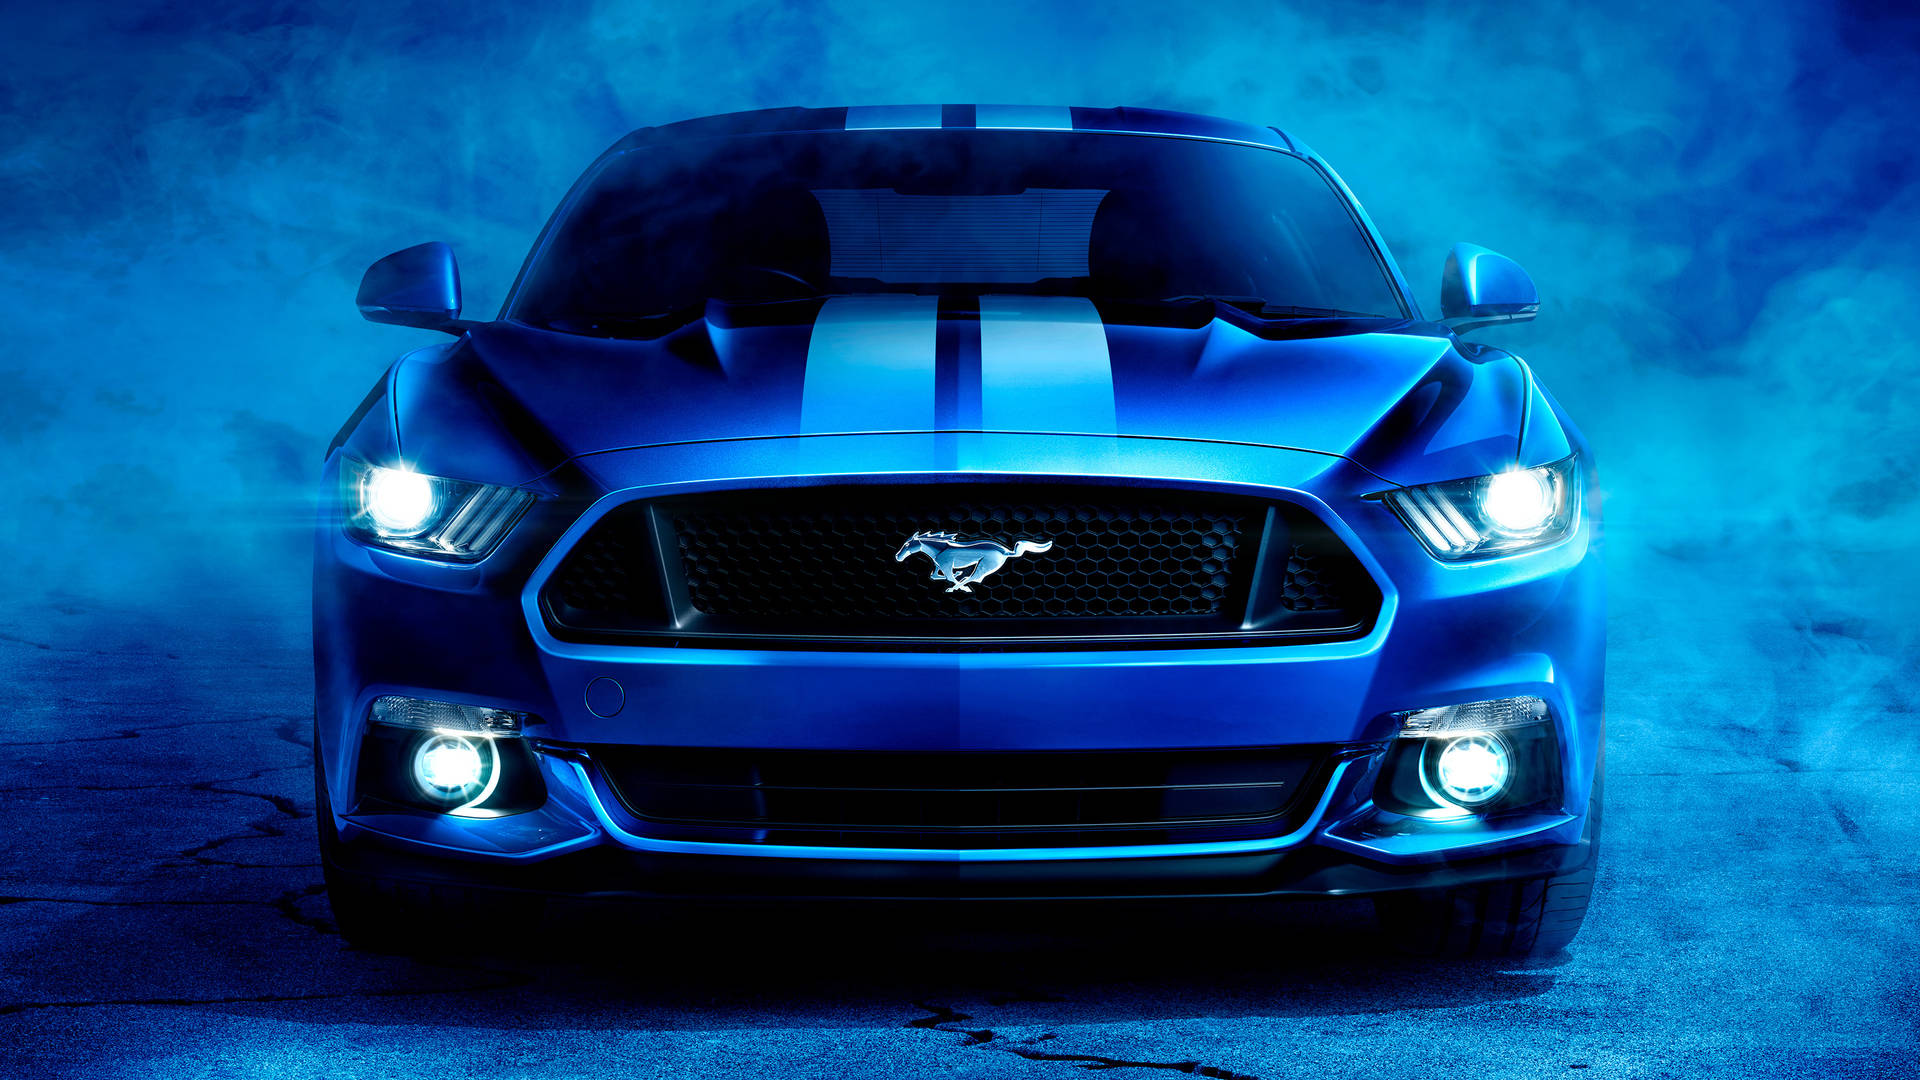 Windows 11 4k Ford Mustang Background